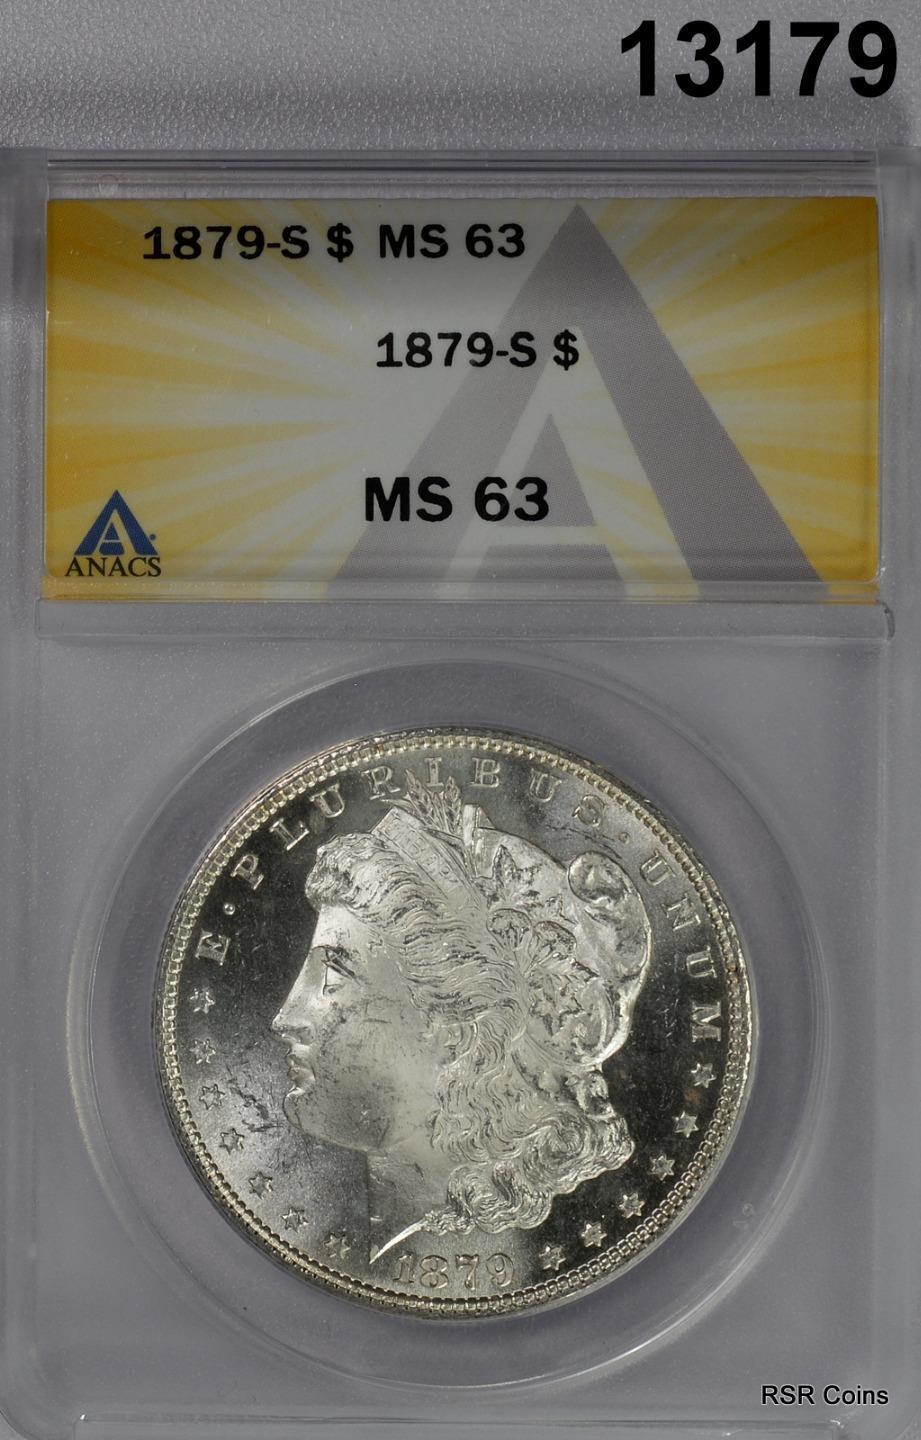 1879 S MORGAN SILVER DOLLAR ANACS CERTIFIED MS63 LOOKS MUCH BETTER! (PL) #13179